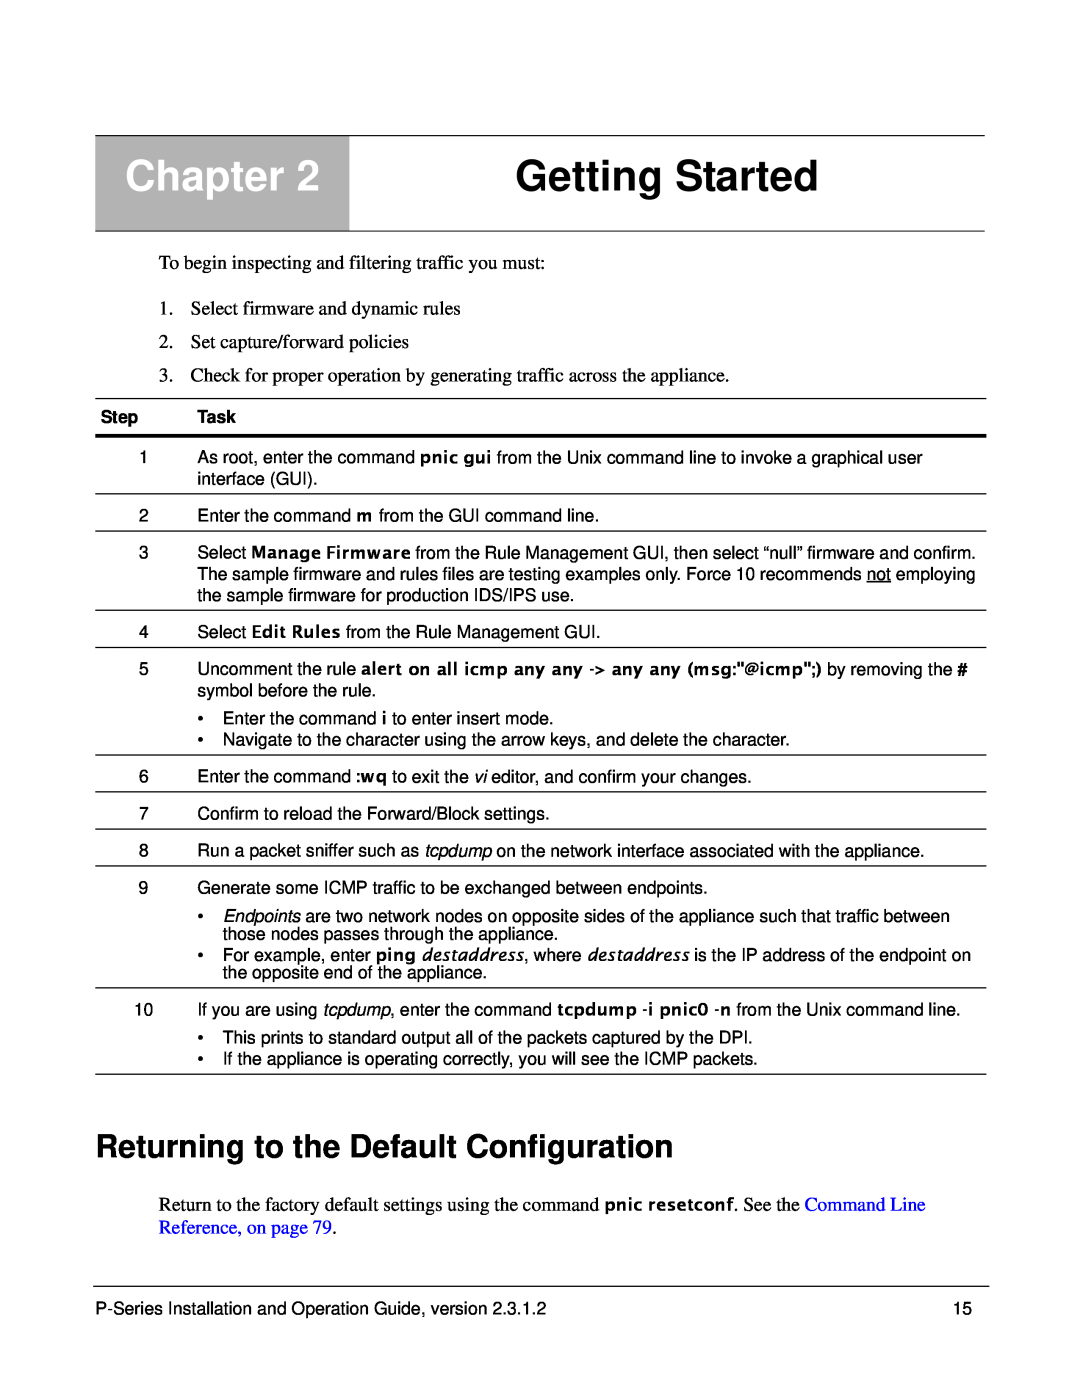 Force10 Networks 100-00055-01 manual Getting Started, Returning to the Default Configuration, Chapter 